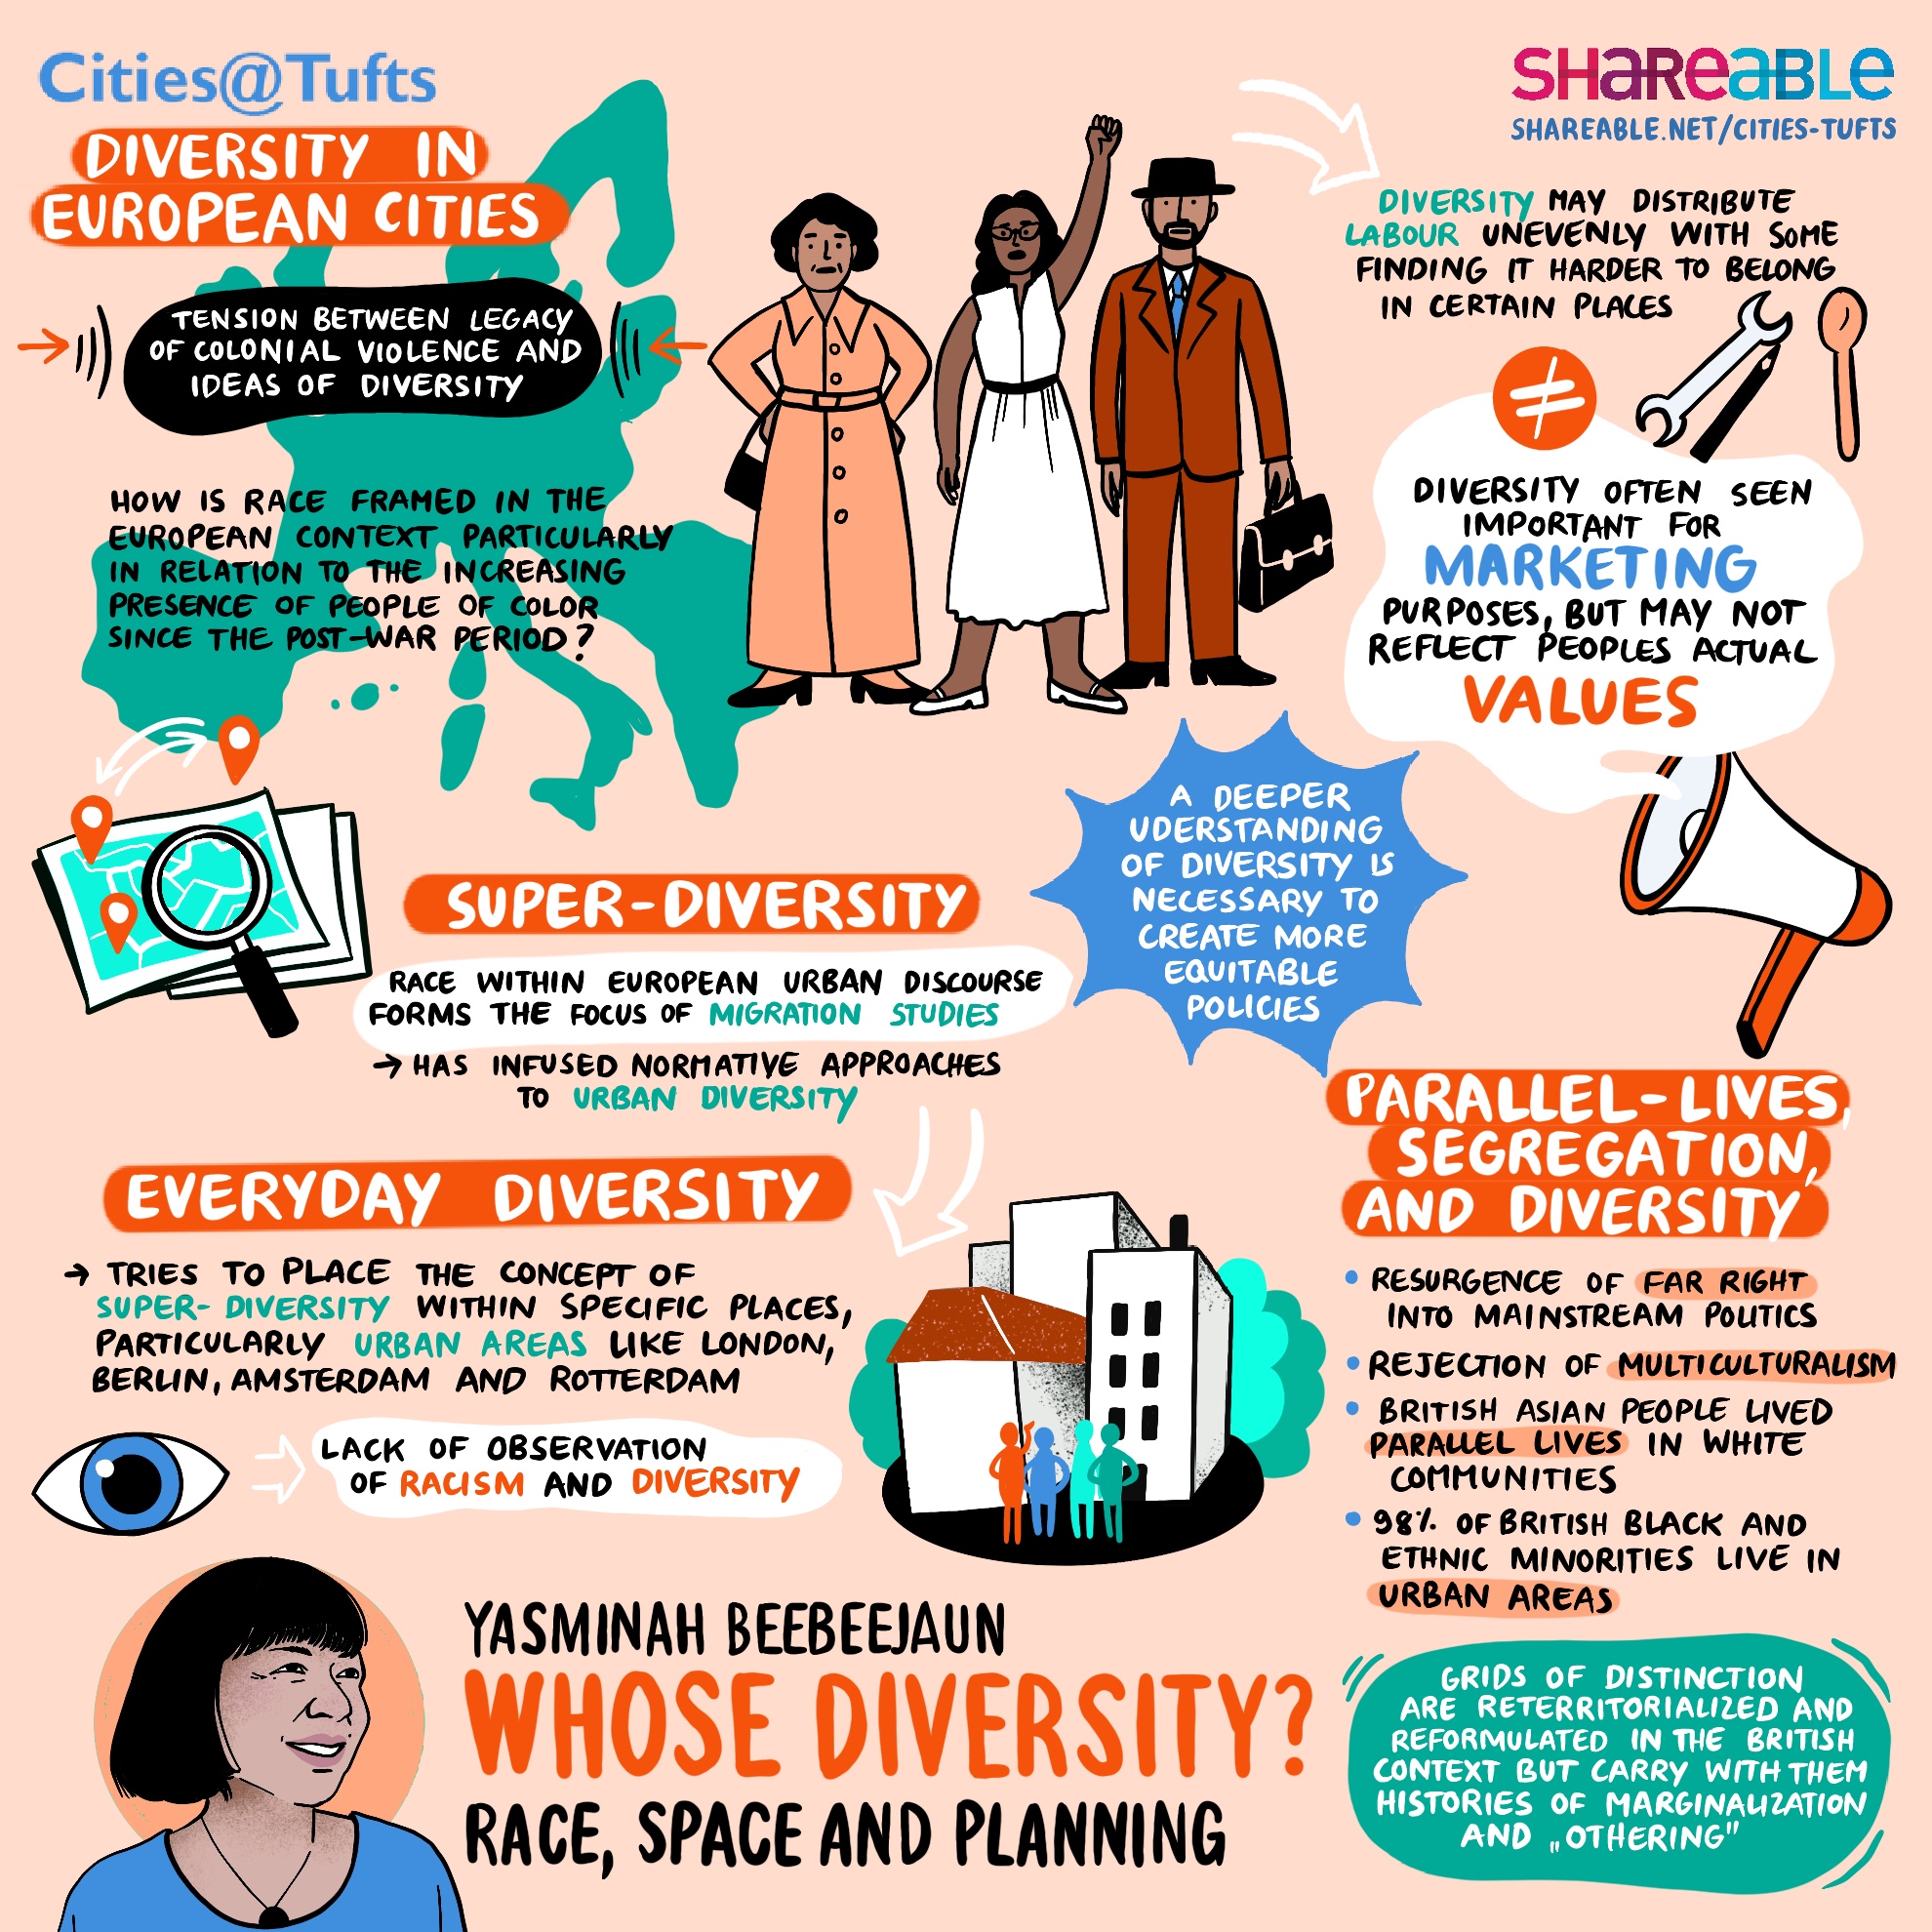 Whose Diversity? Illustrated by Anke Dregnet